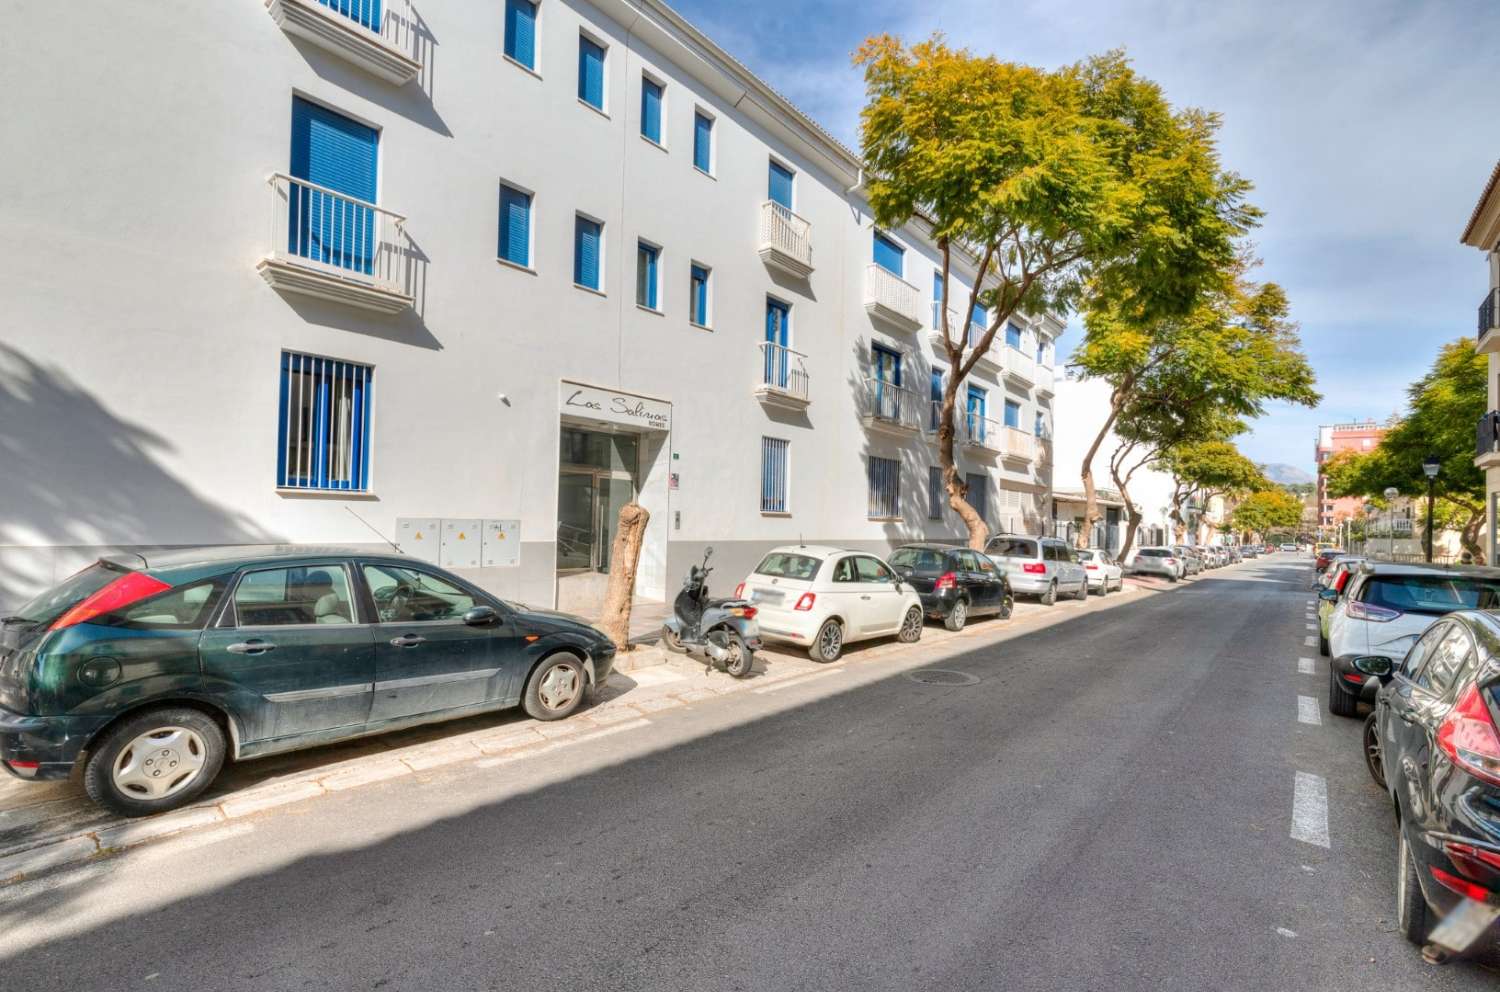 Bright, nice apartment in Los Boliches, Fuengirola, only 300 meters to the train station and 450 meters to the sea